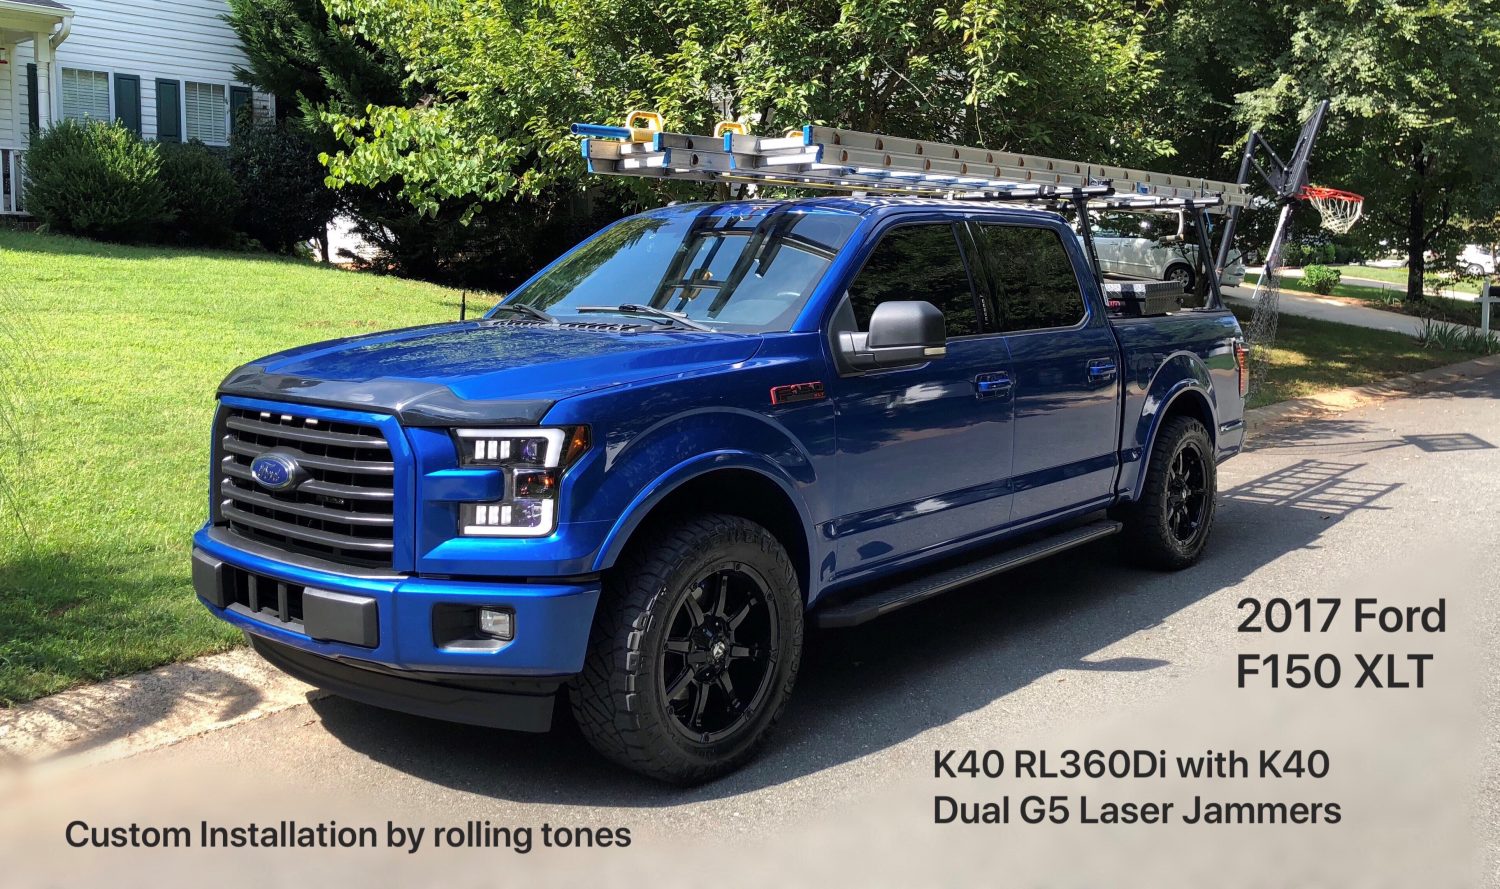 K40 radar detector and laser jammers on a Ford F150 XLT